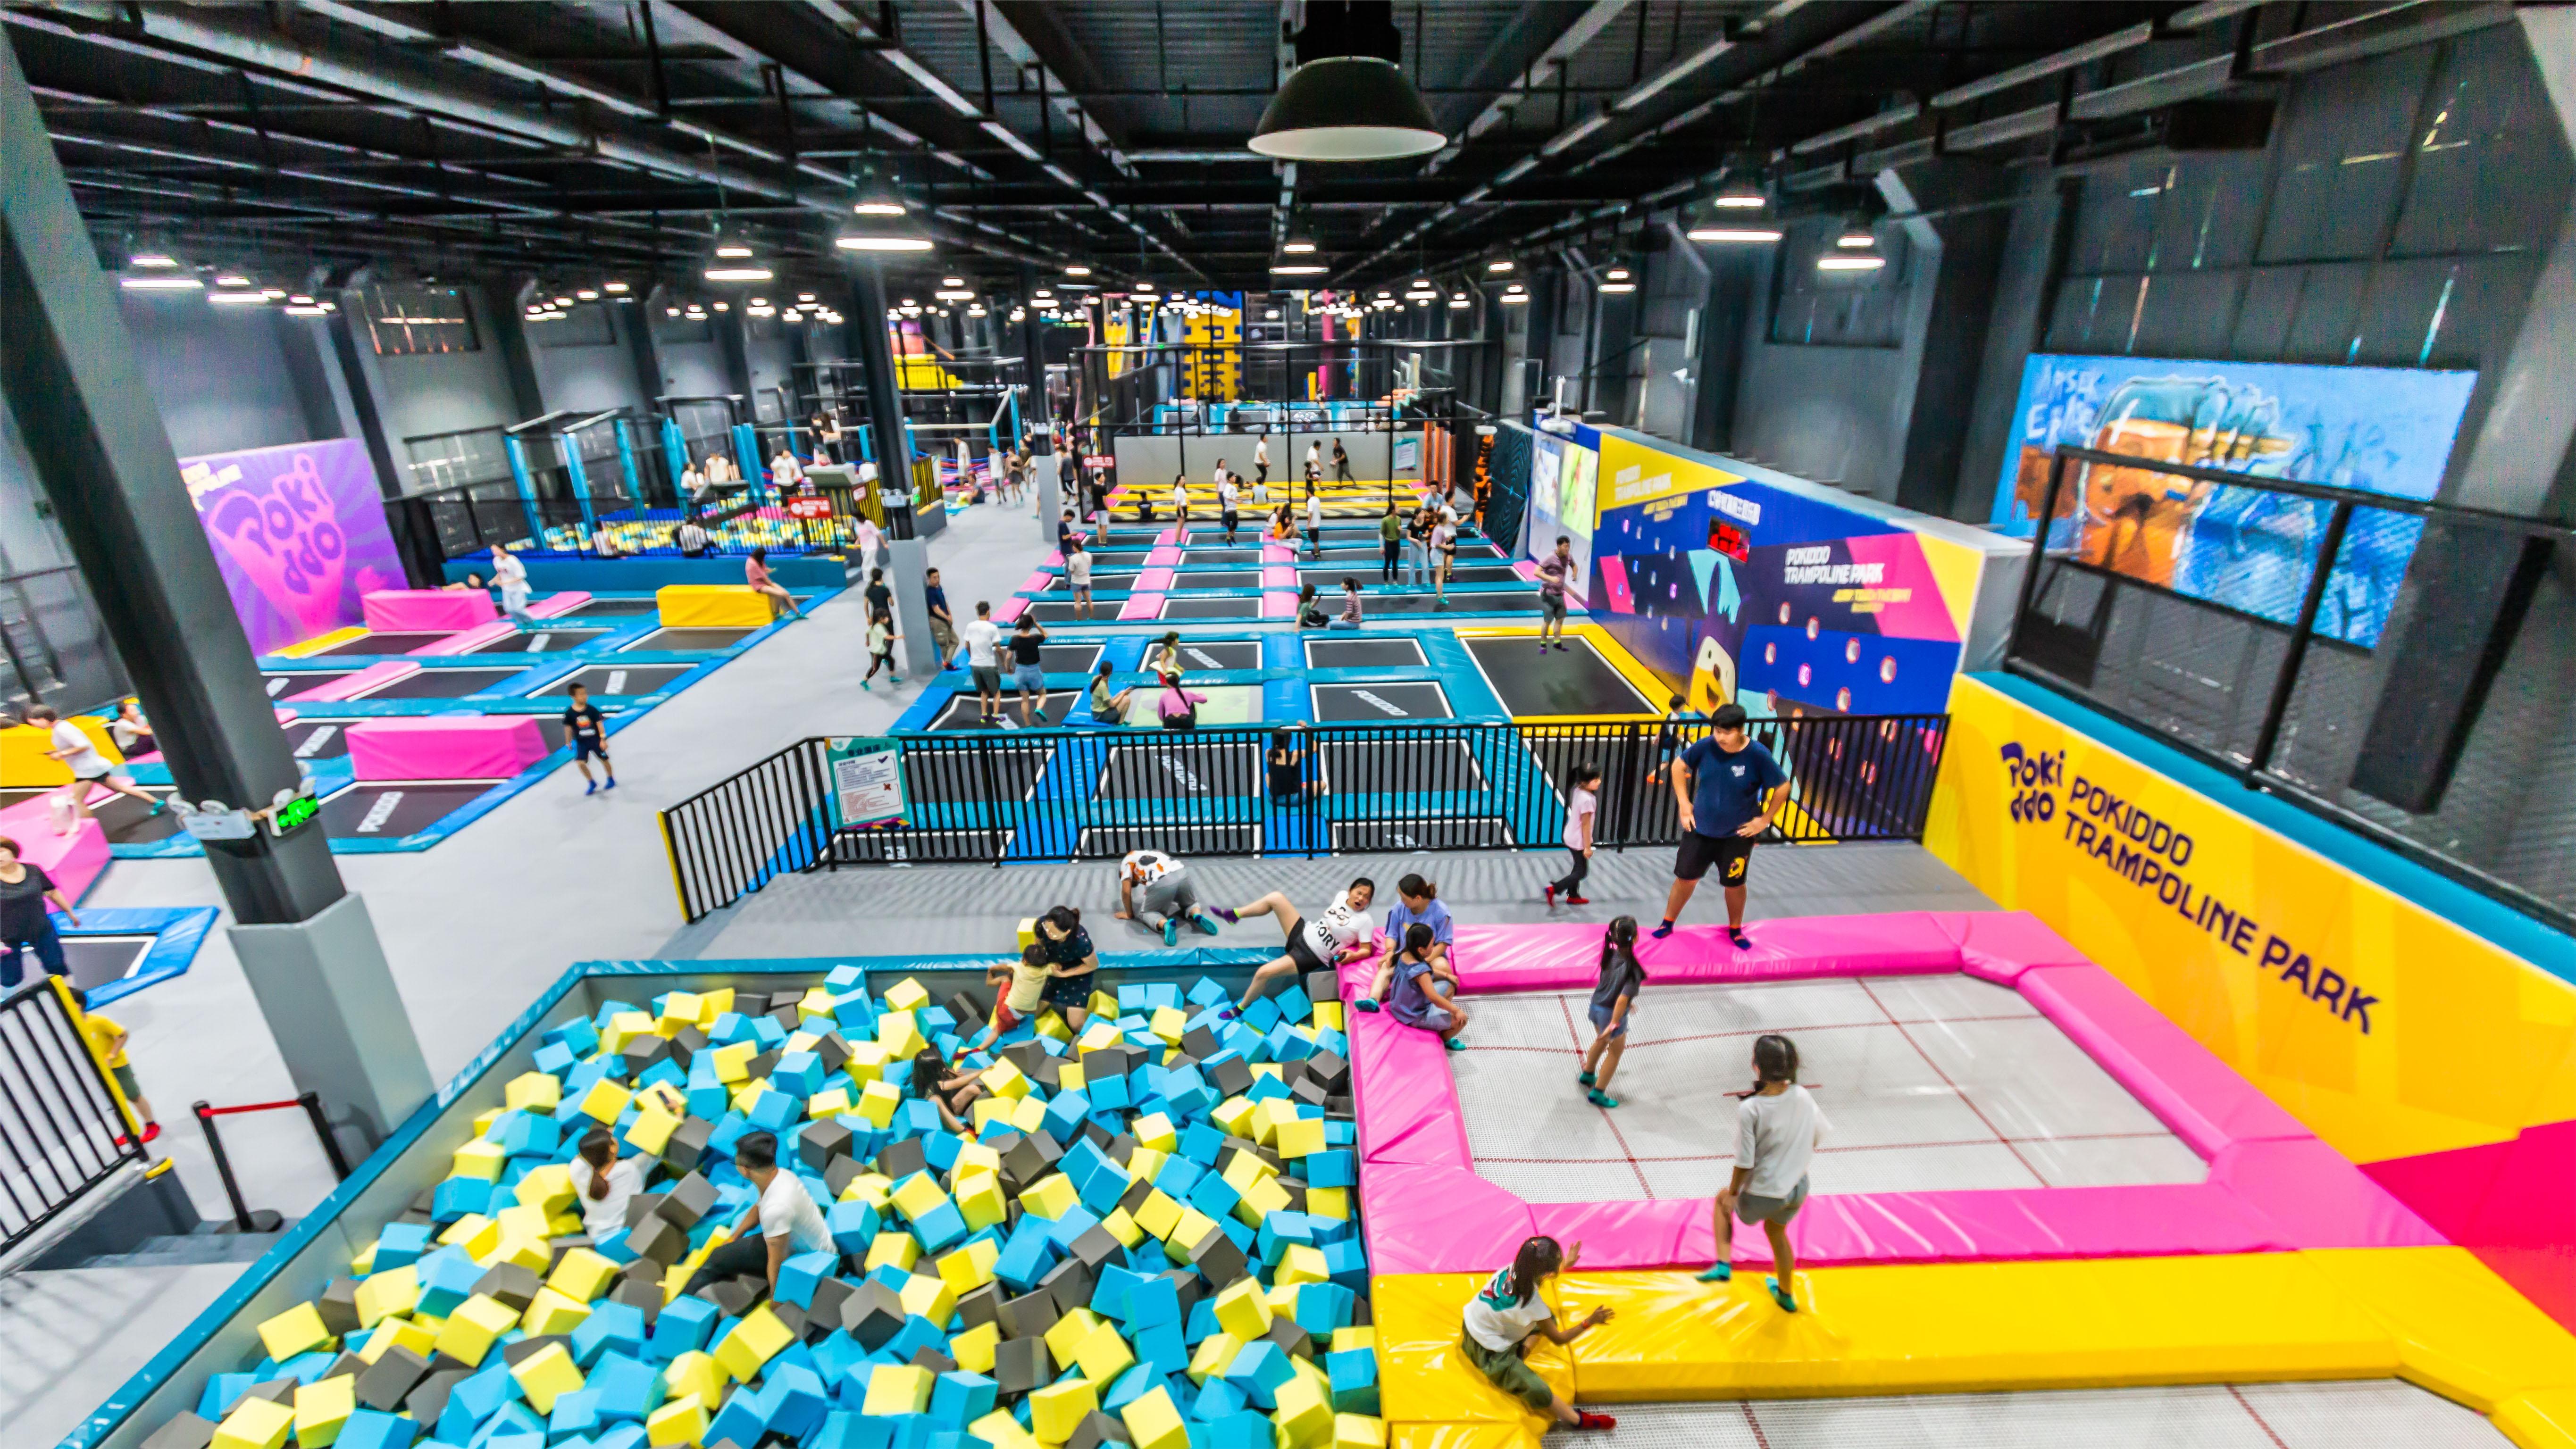 What factors will affect the purchase of tickets for indoor trampoline park customers?